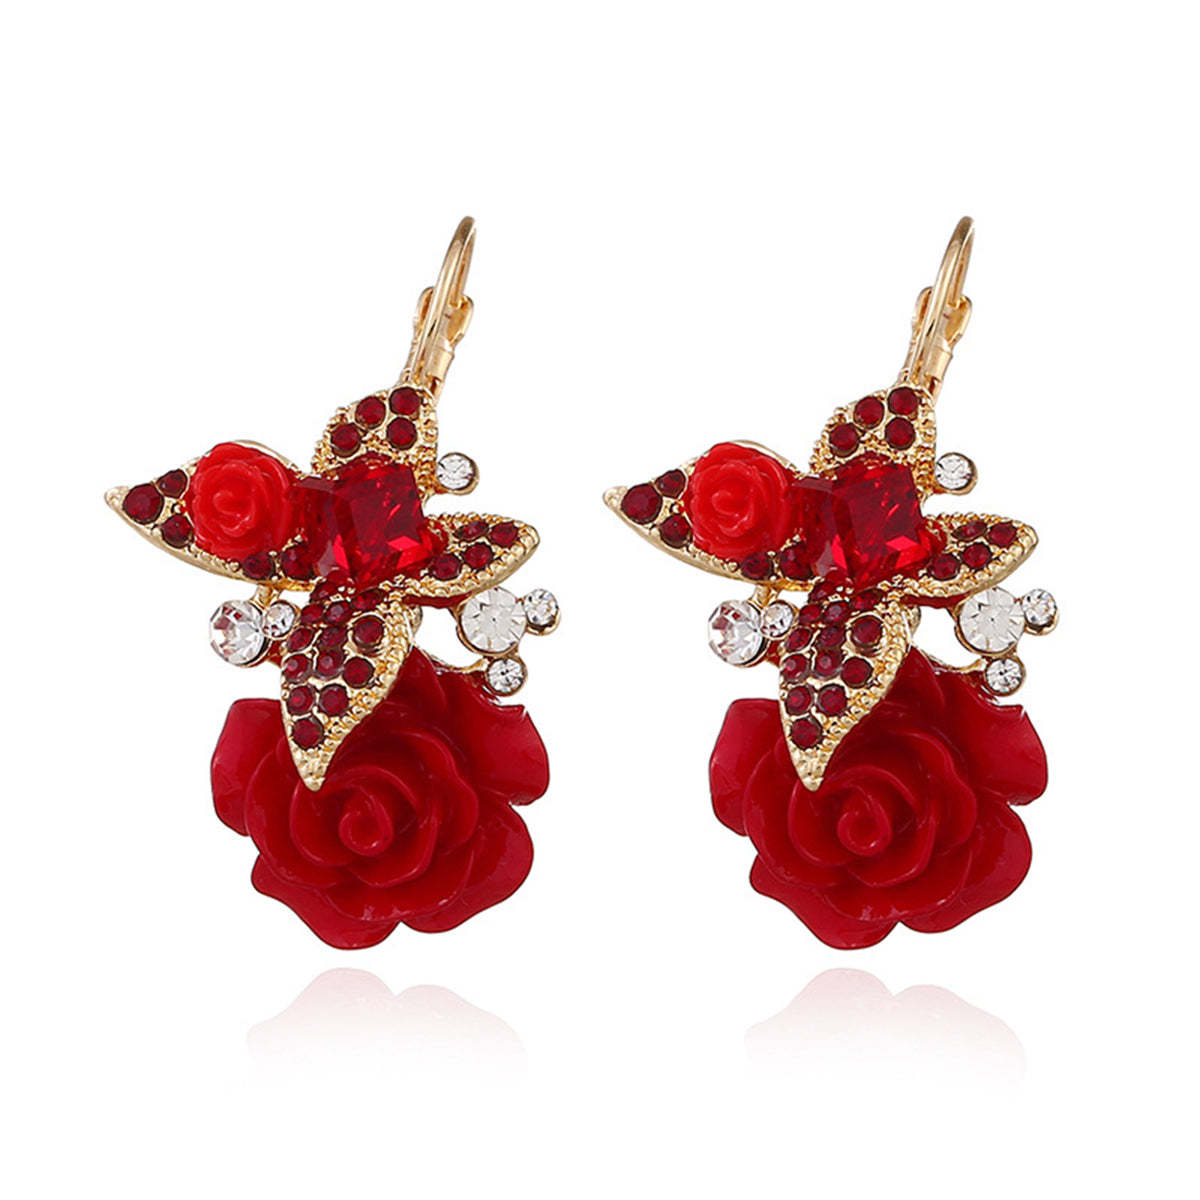 Primary image for Red Crystal & Cubic Zirconia Flower Drop Earrings